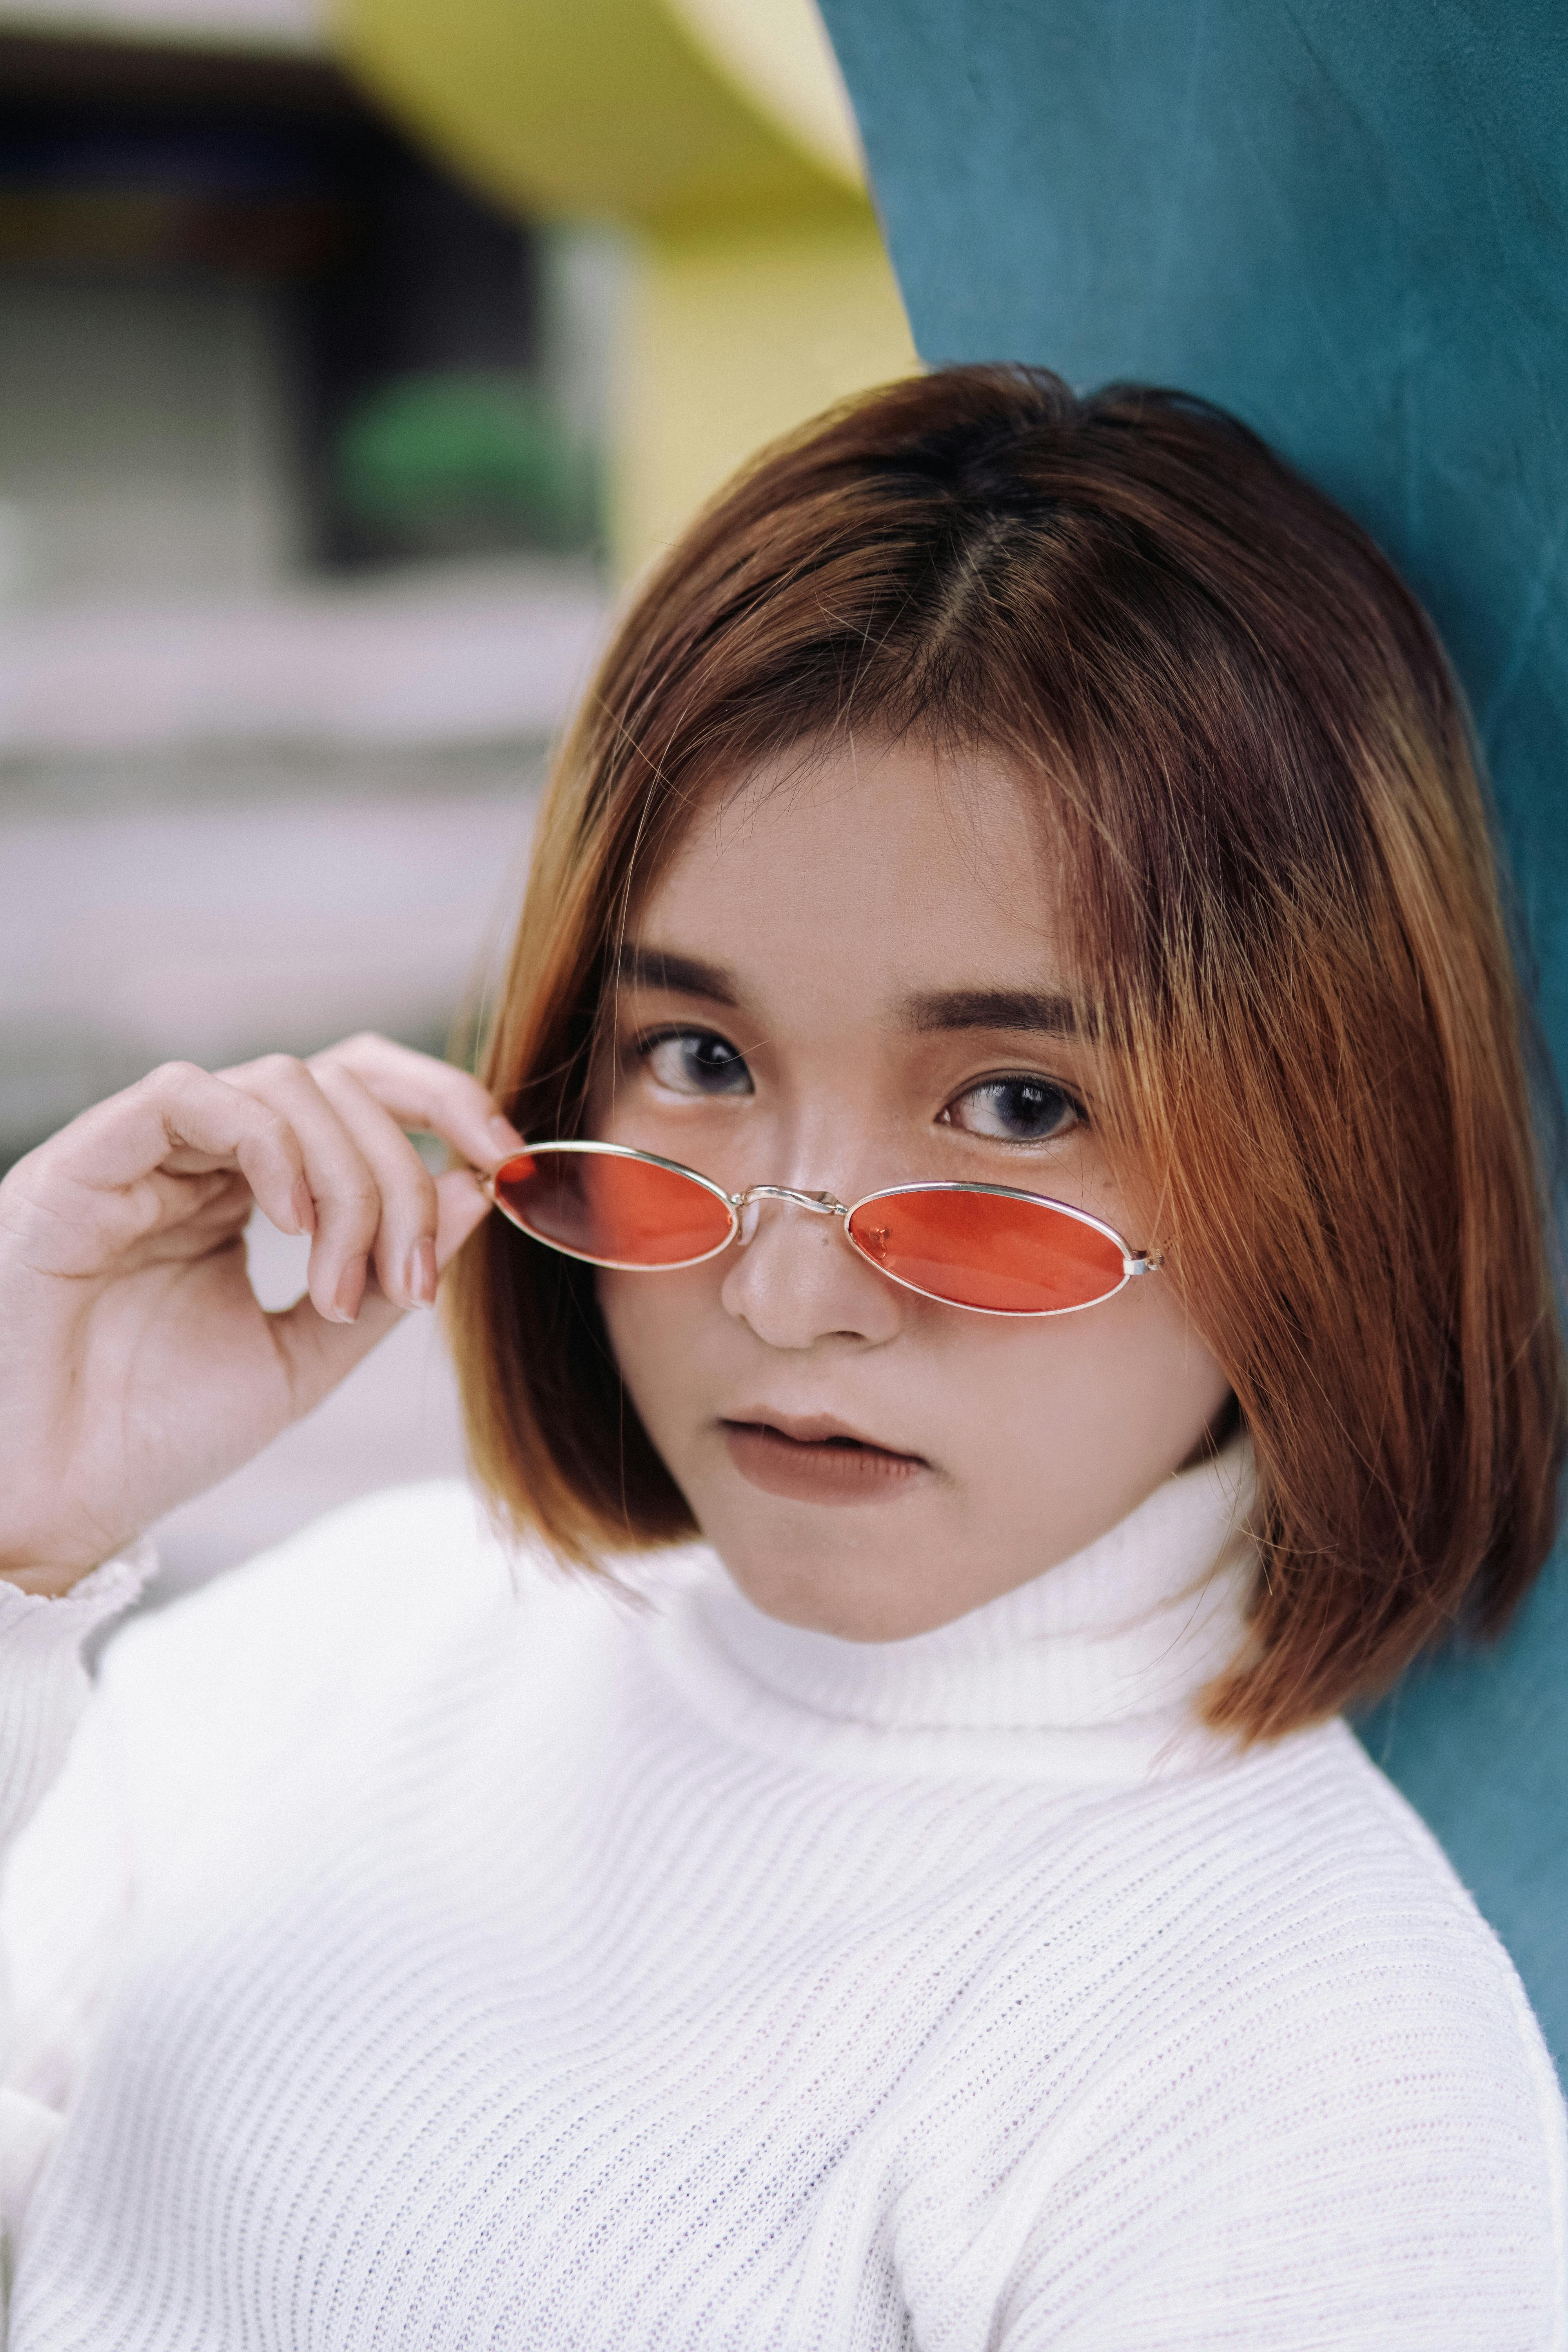 Girl with Short Hair Wearing Sunglasses · Free Stock Photo